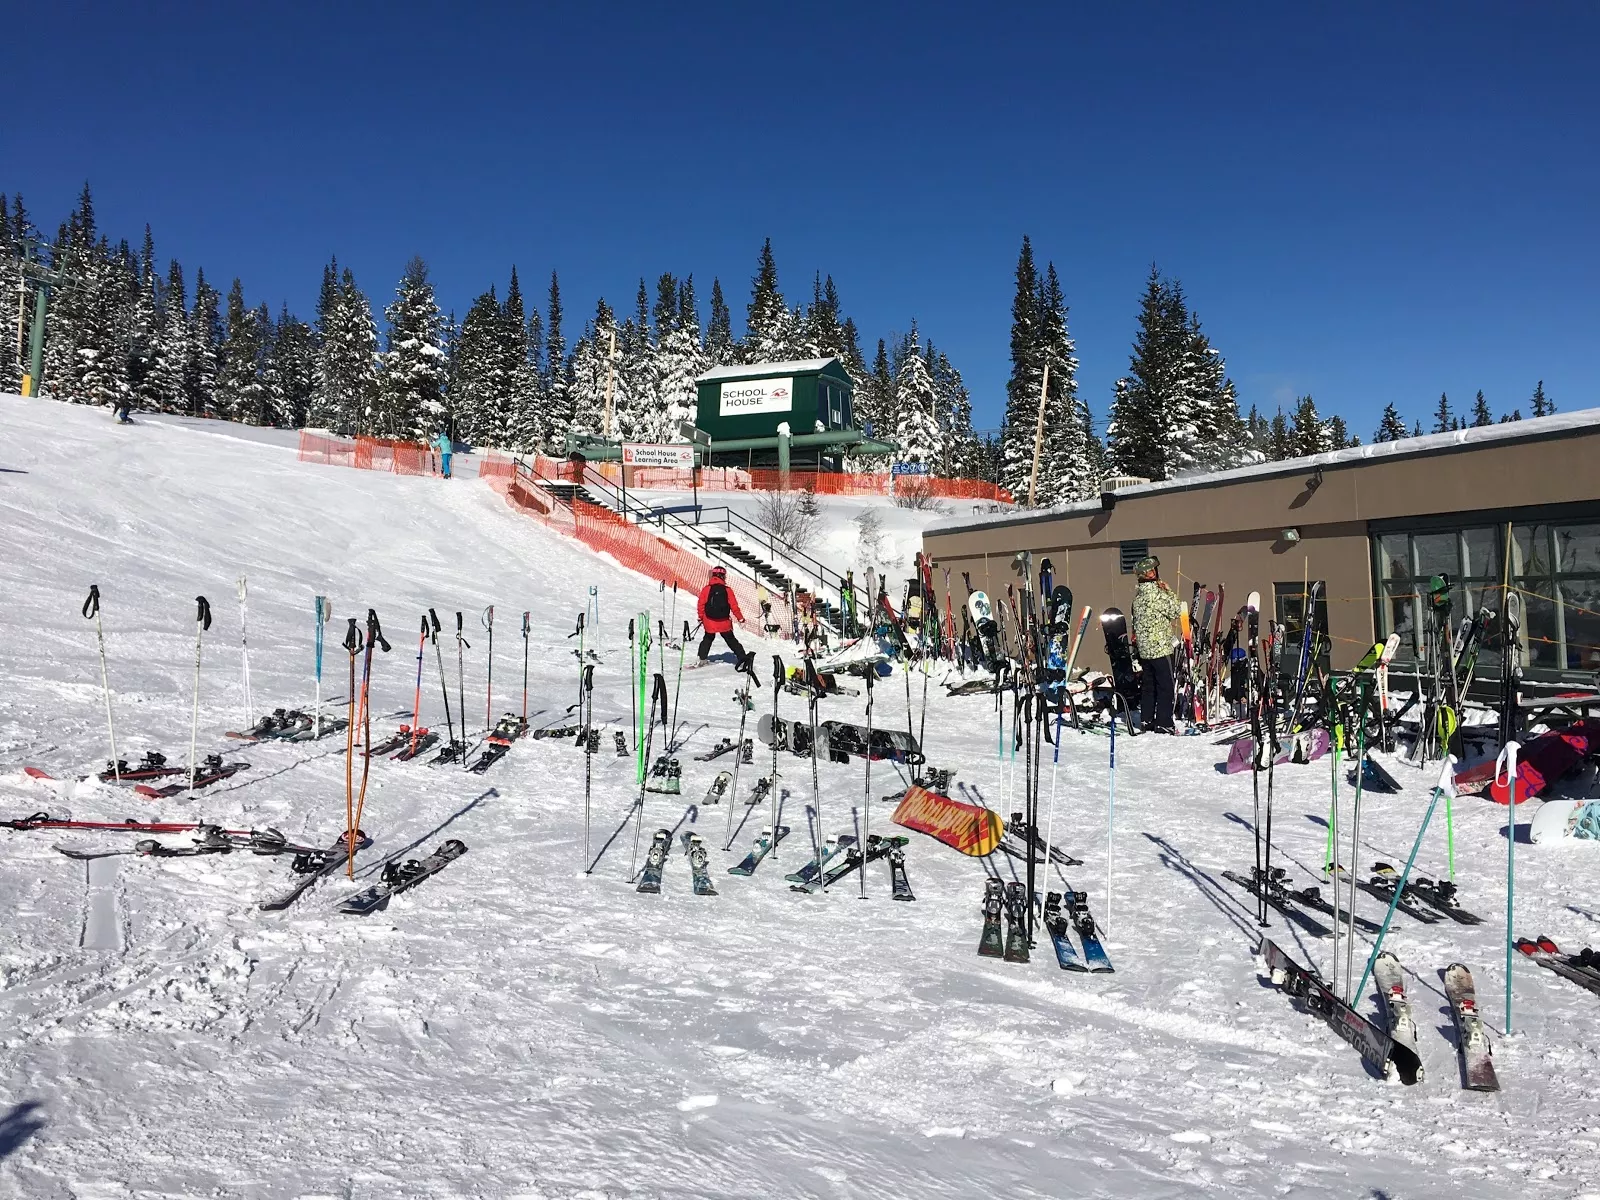 CA Main Lodge Retail in USA, North America | Snowboarding,Skiing - Rated 0.9